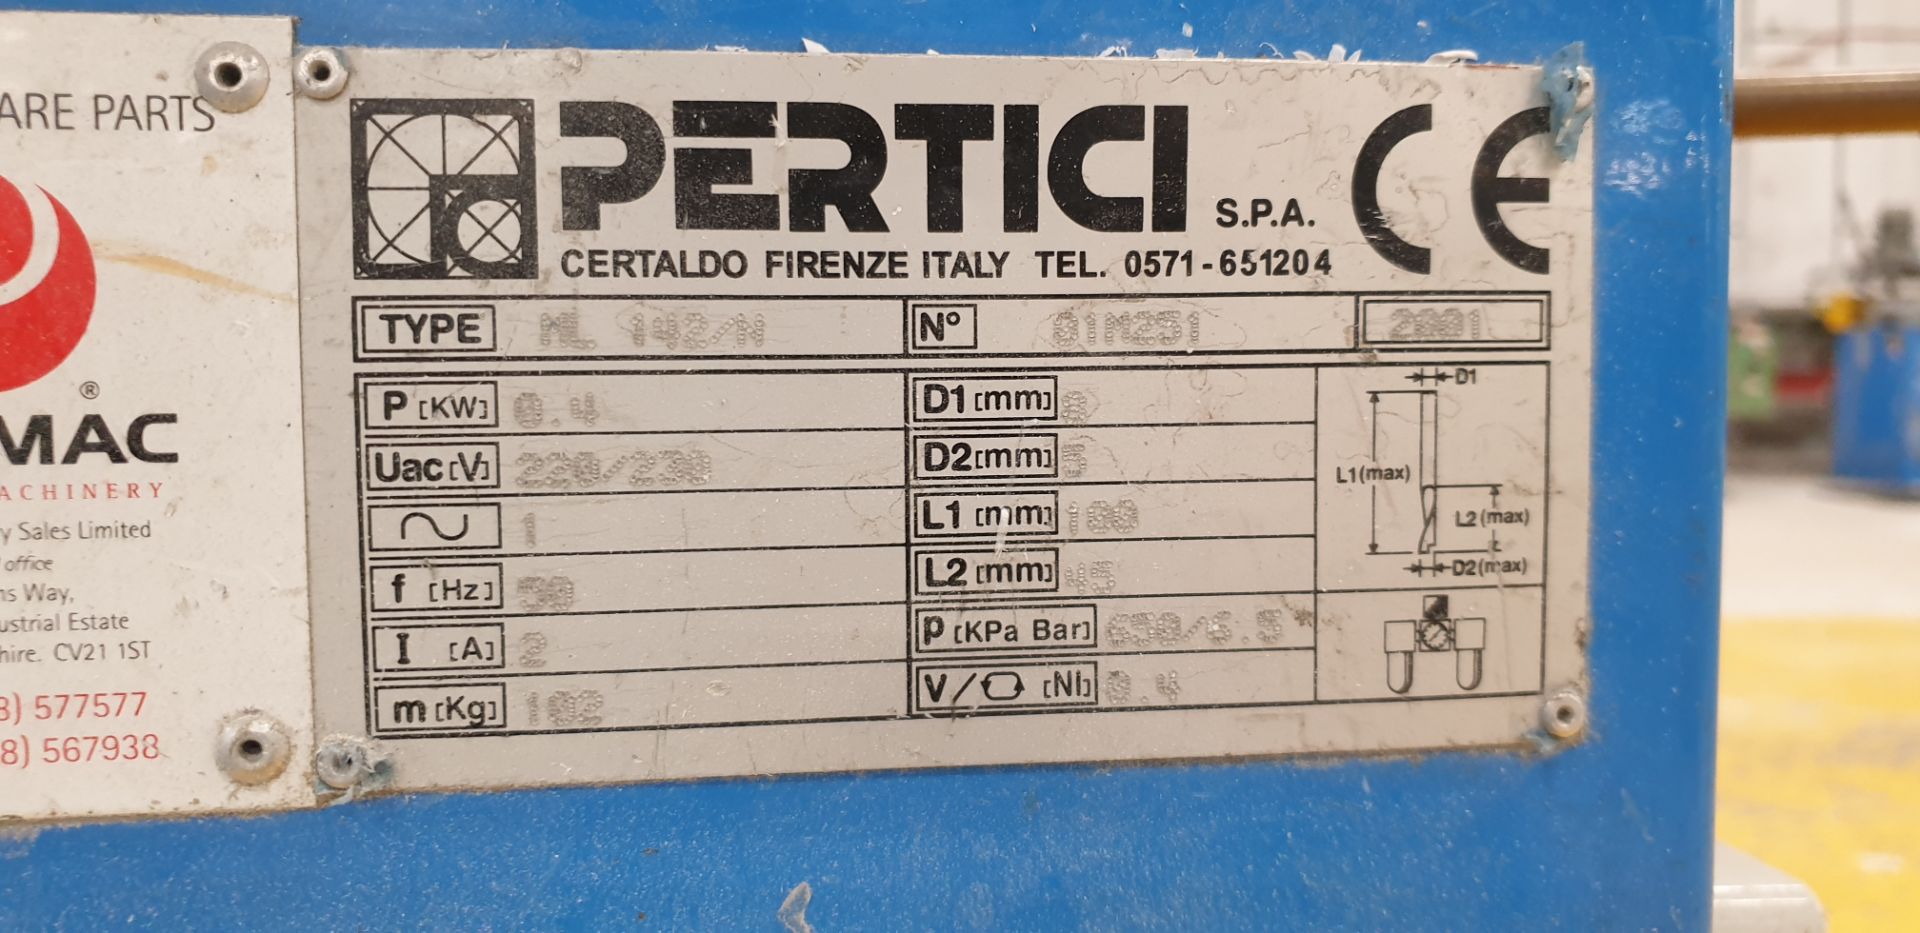 1: Promac ML 142/N Pertici Manual Milling Machine Serial Number: 01M251 Year of Manufacture: 2001 - Image 2 of 2